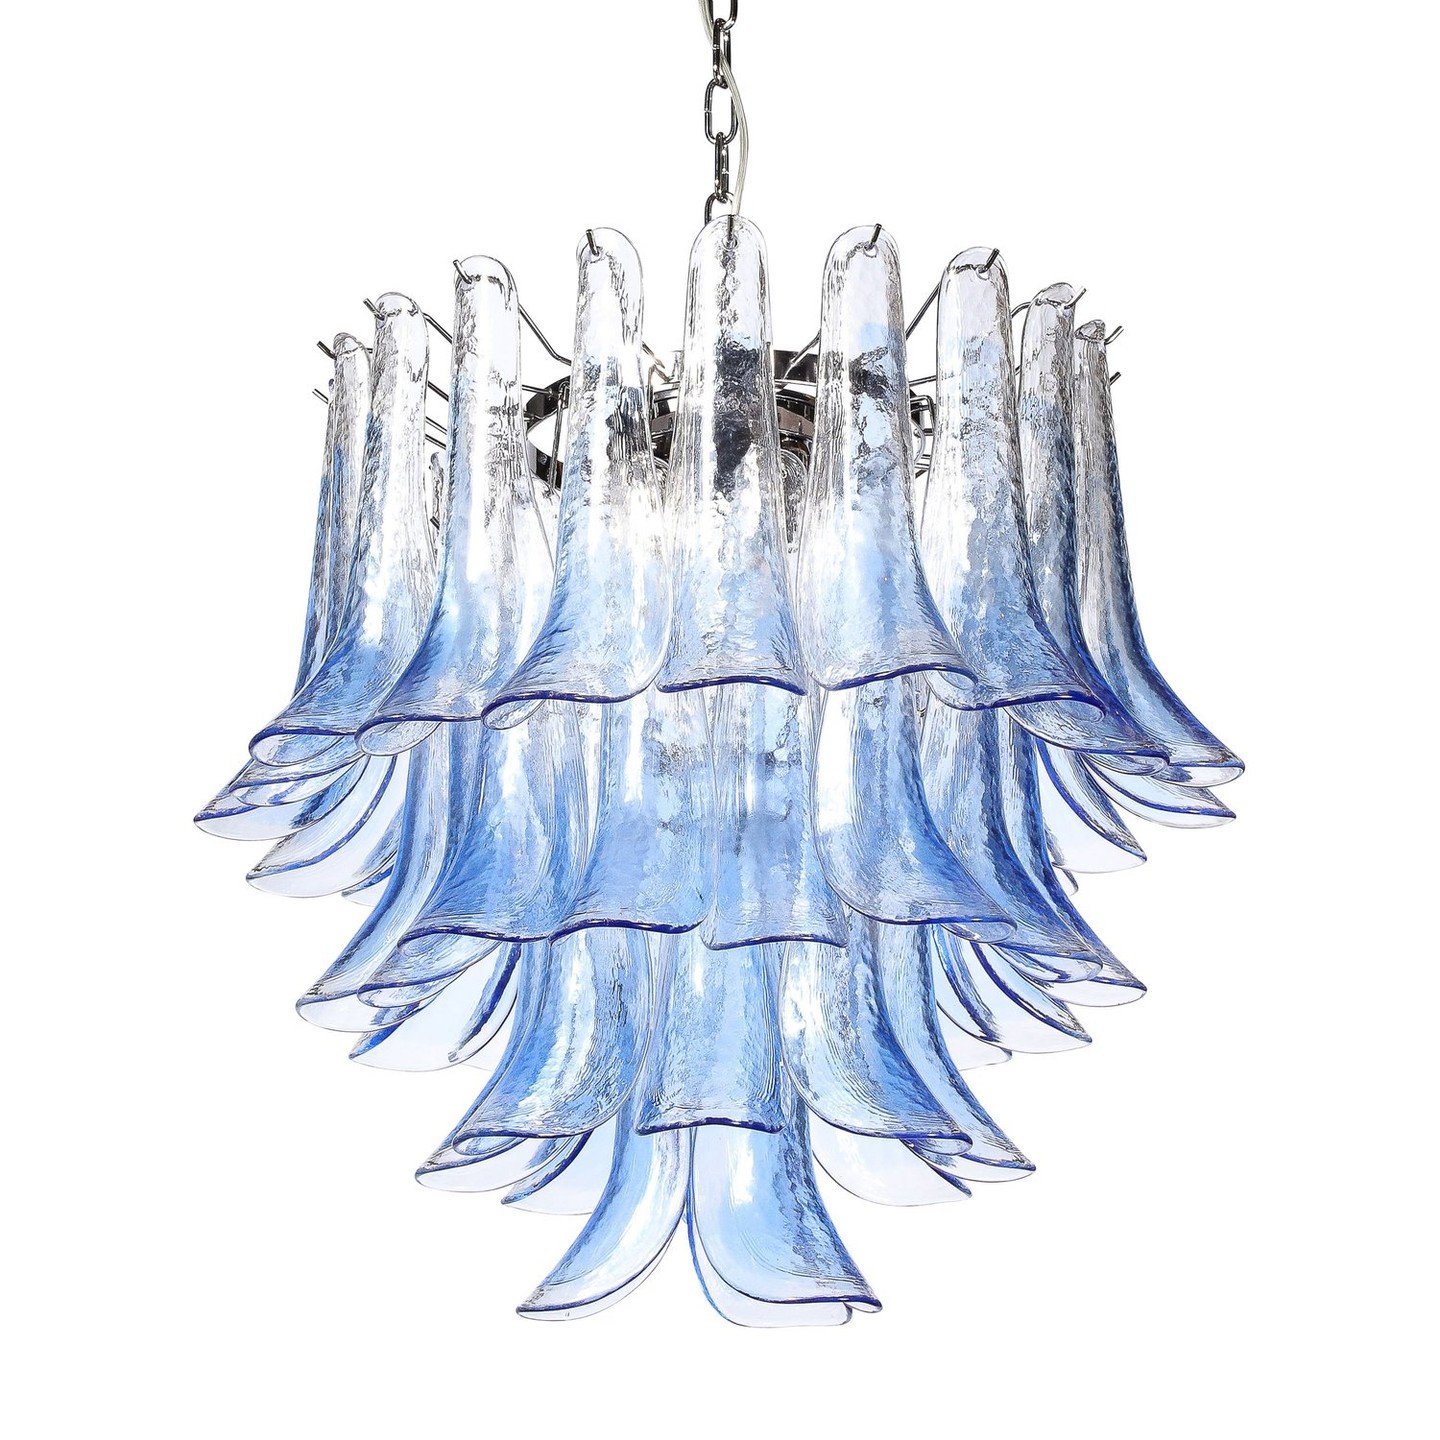 Modernist Four-Tier Hand-Blown Translucent Blue Murano Glass Feather Chandelier

This lovely Modernist Hand-Blown Murano Glass Four-Tier Feather Chandelier in Cornflower Blue Originates from Italy during the Latter half of the 20th Century. With a ch